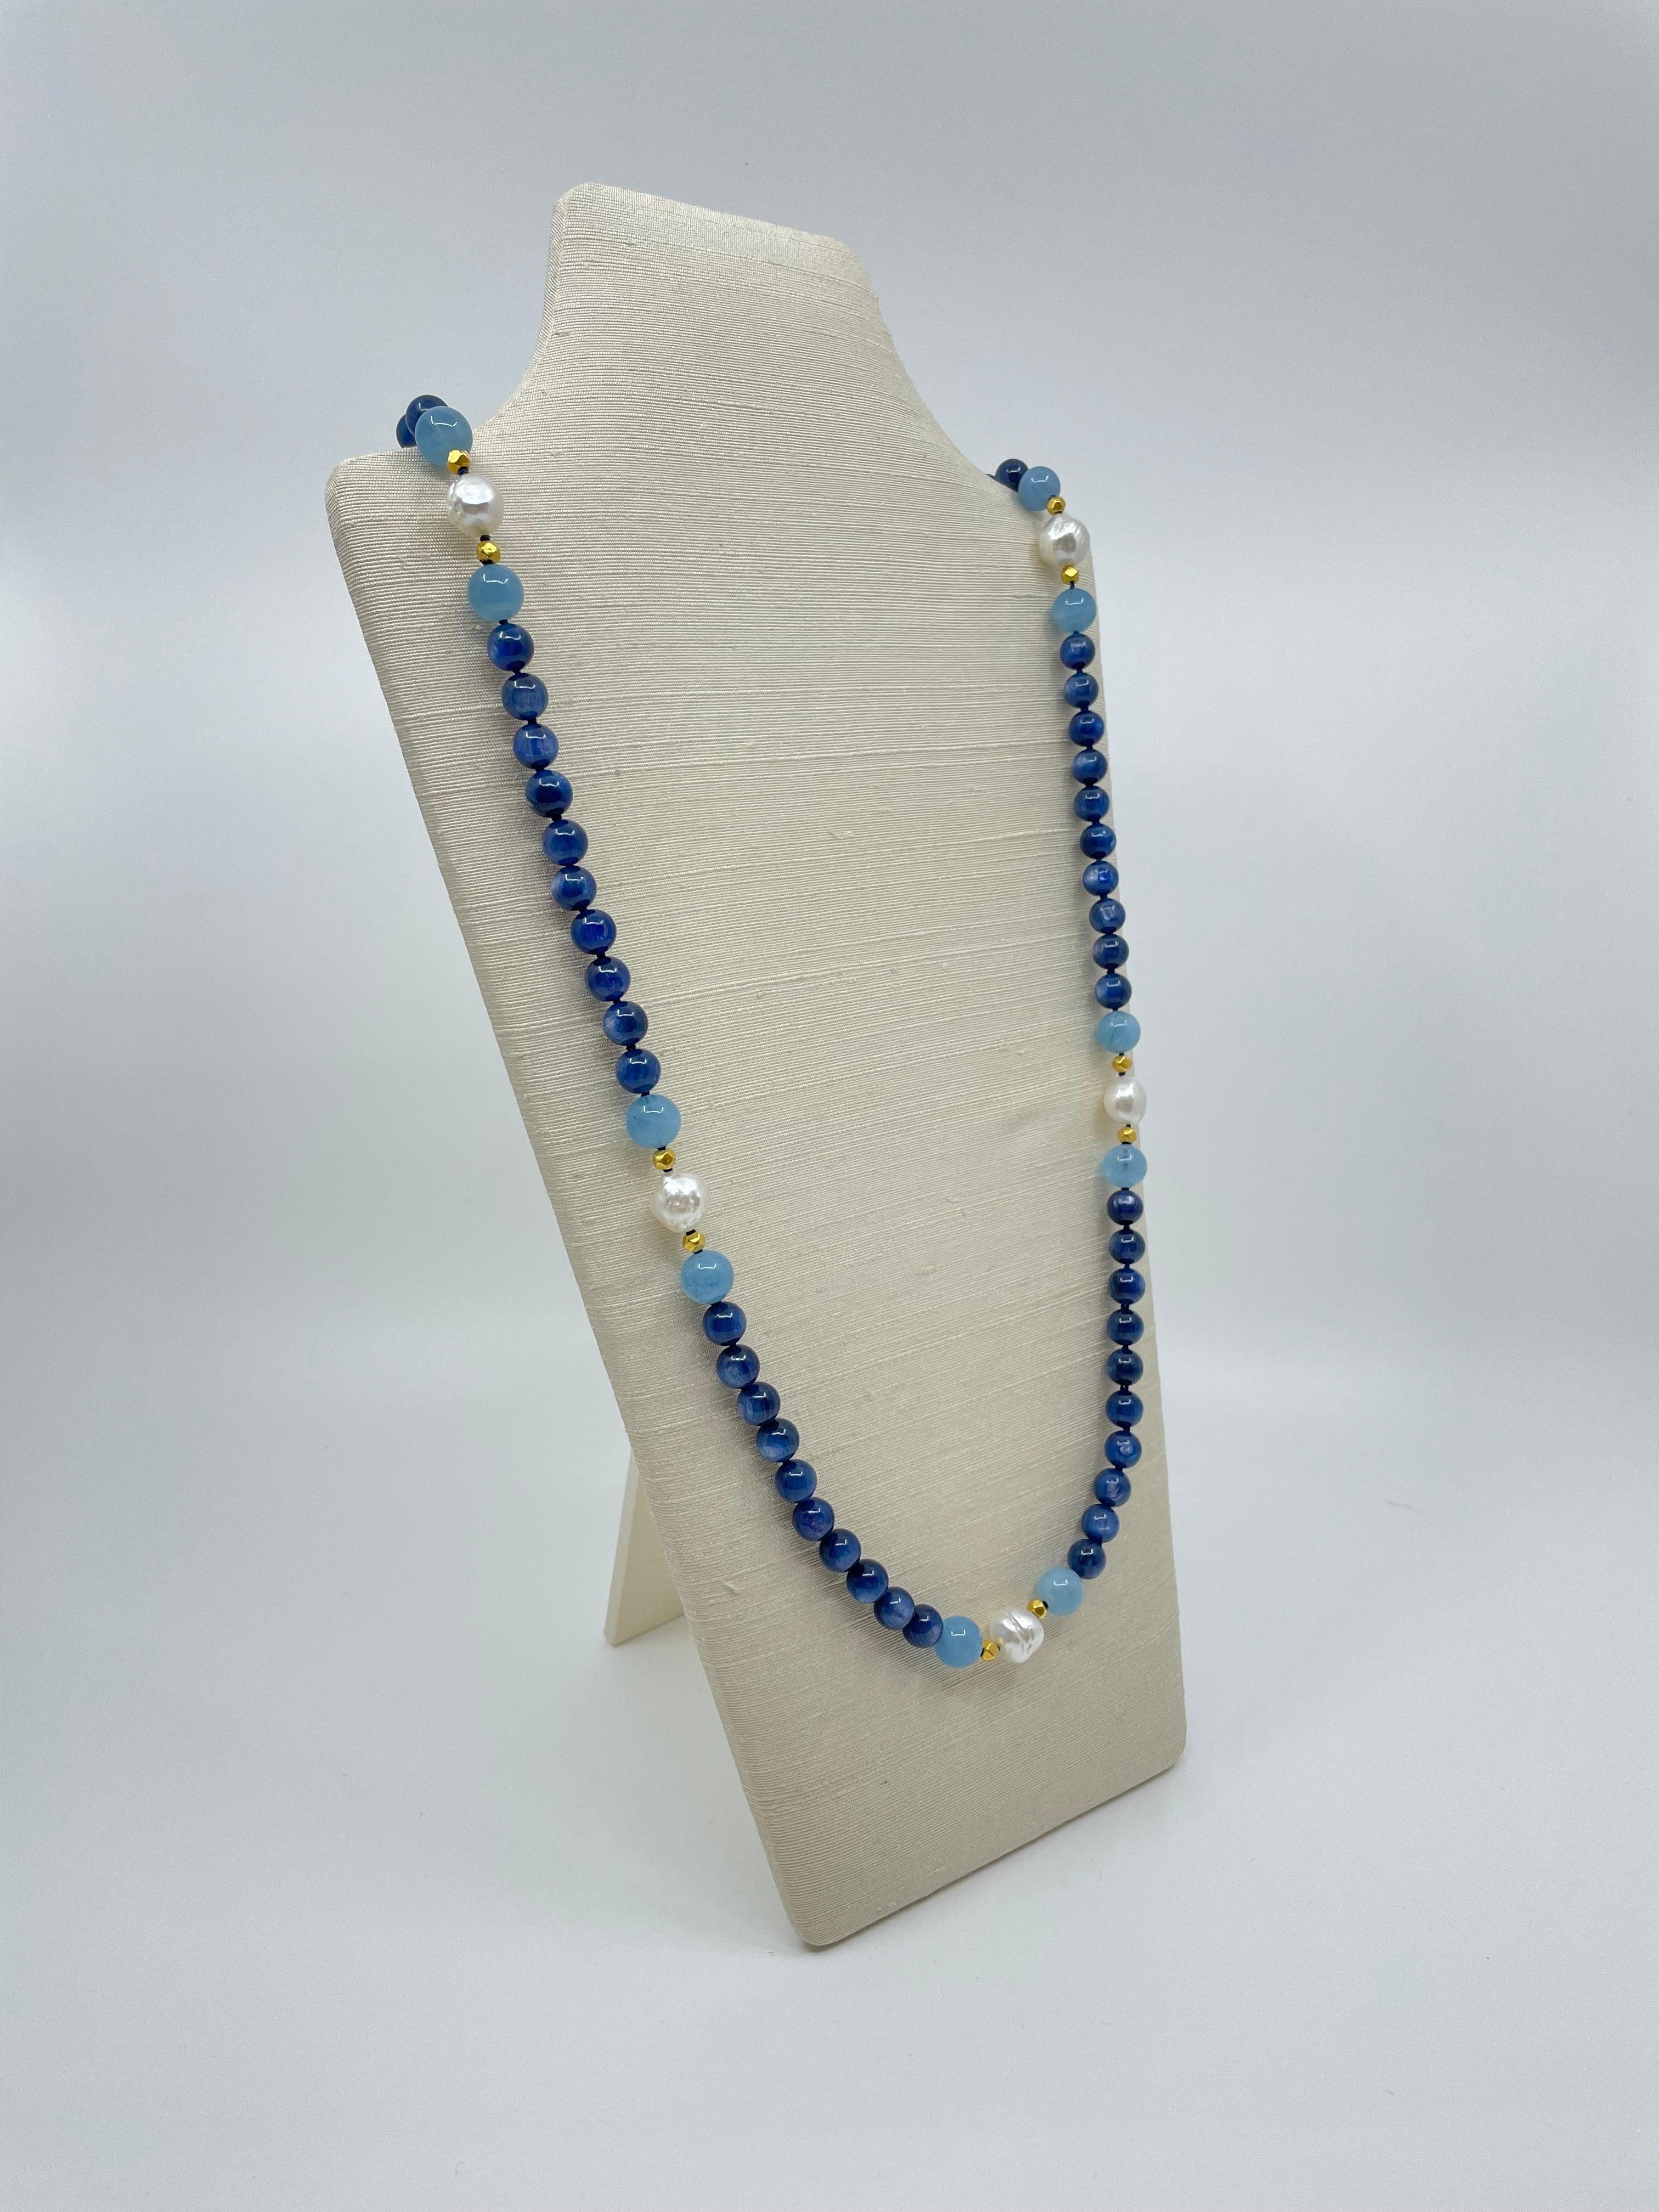 Long Necklace with Kyanite, Aquamarine, South Sea Pearls & 18K Solid Gold Beads For Sale 1